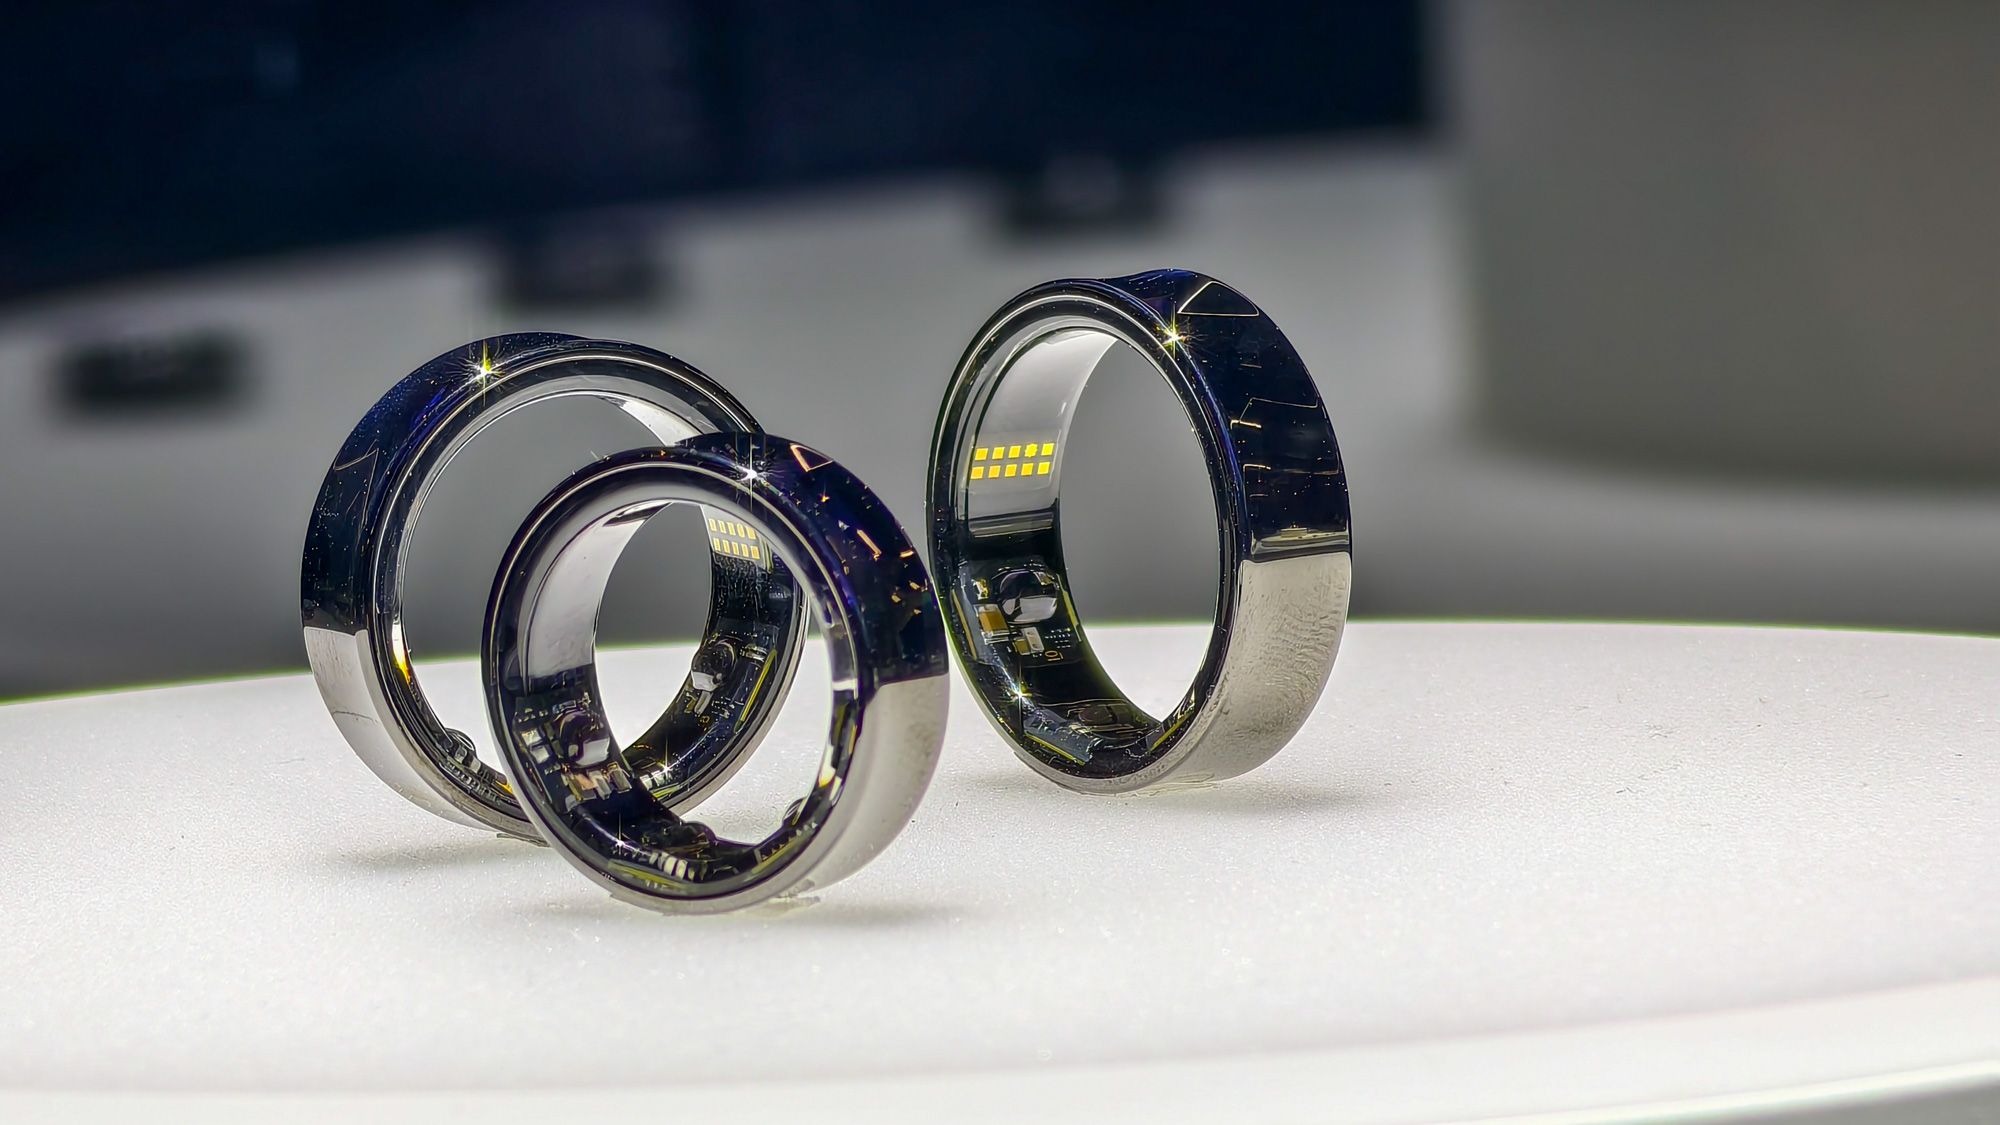 The Galaxy Ring could be Samsung's first entry into the smart ring market